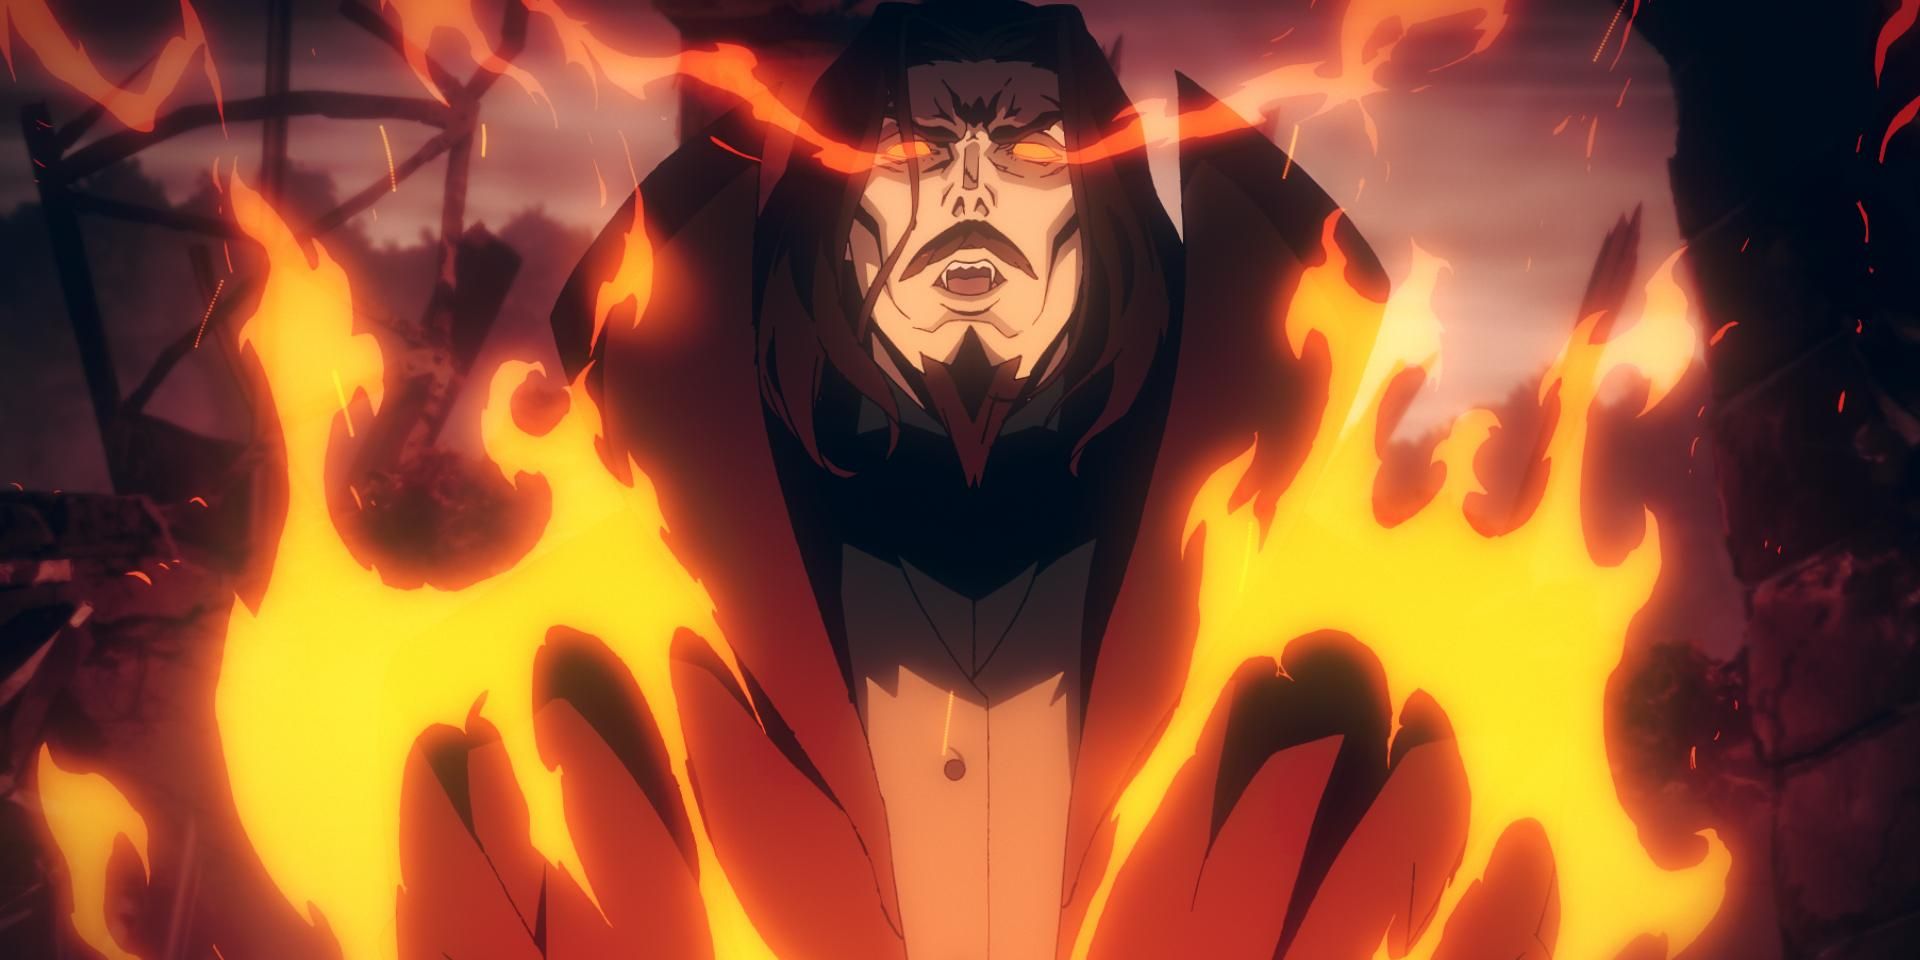 An furious Dracula, voiced by Graham McTavish, with flames pouring out of his eyes and half-covering his body in Castlevania